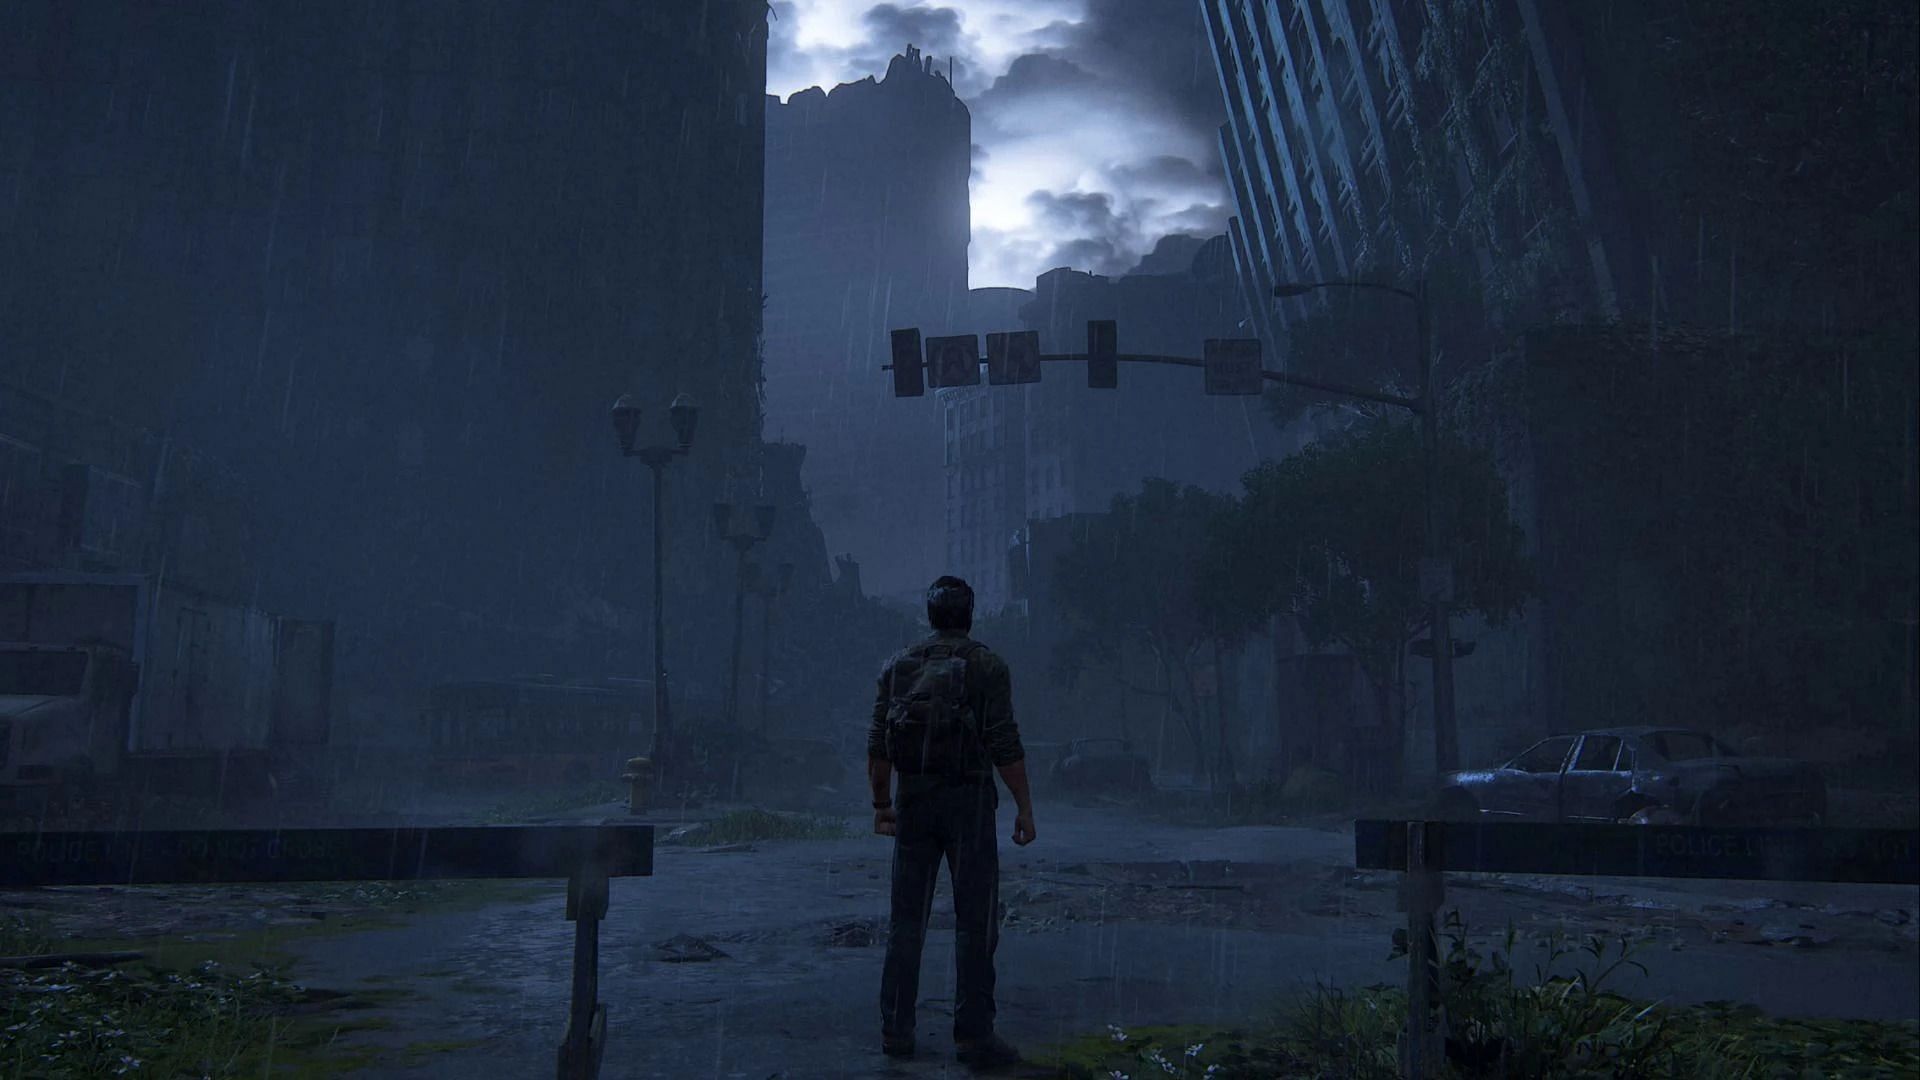 The Last of Us Part I Patch Released to Address Crashes and Shader  Compilation Issues